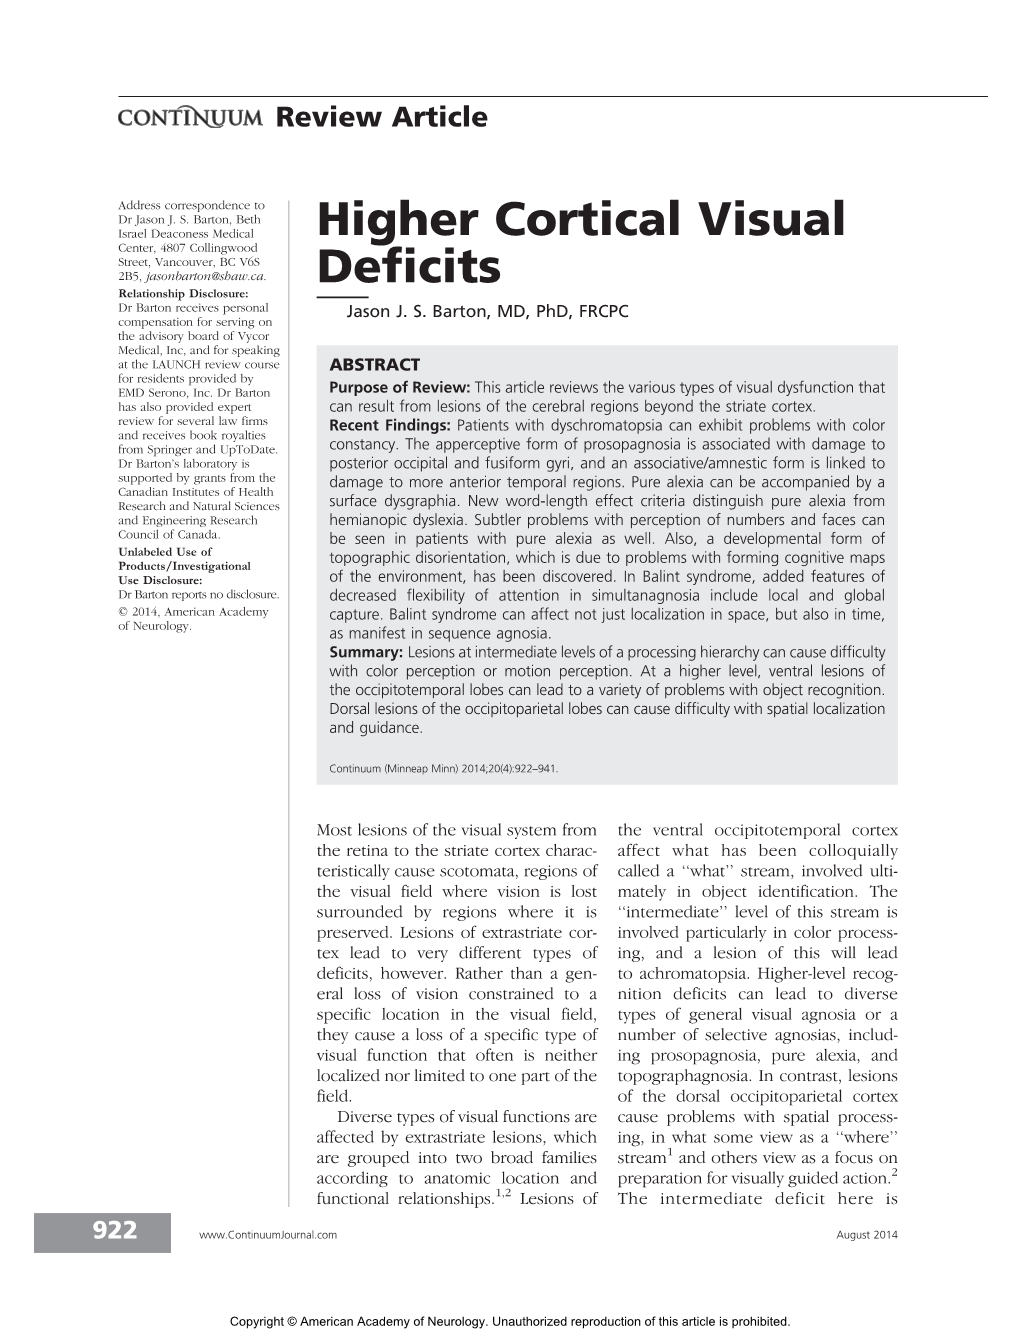 Higher Cortical Visual Deficits